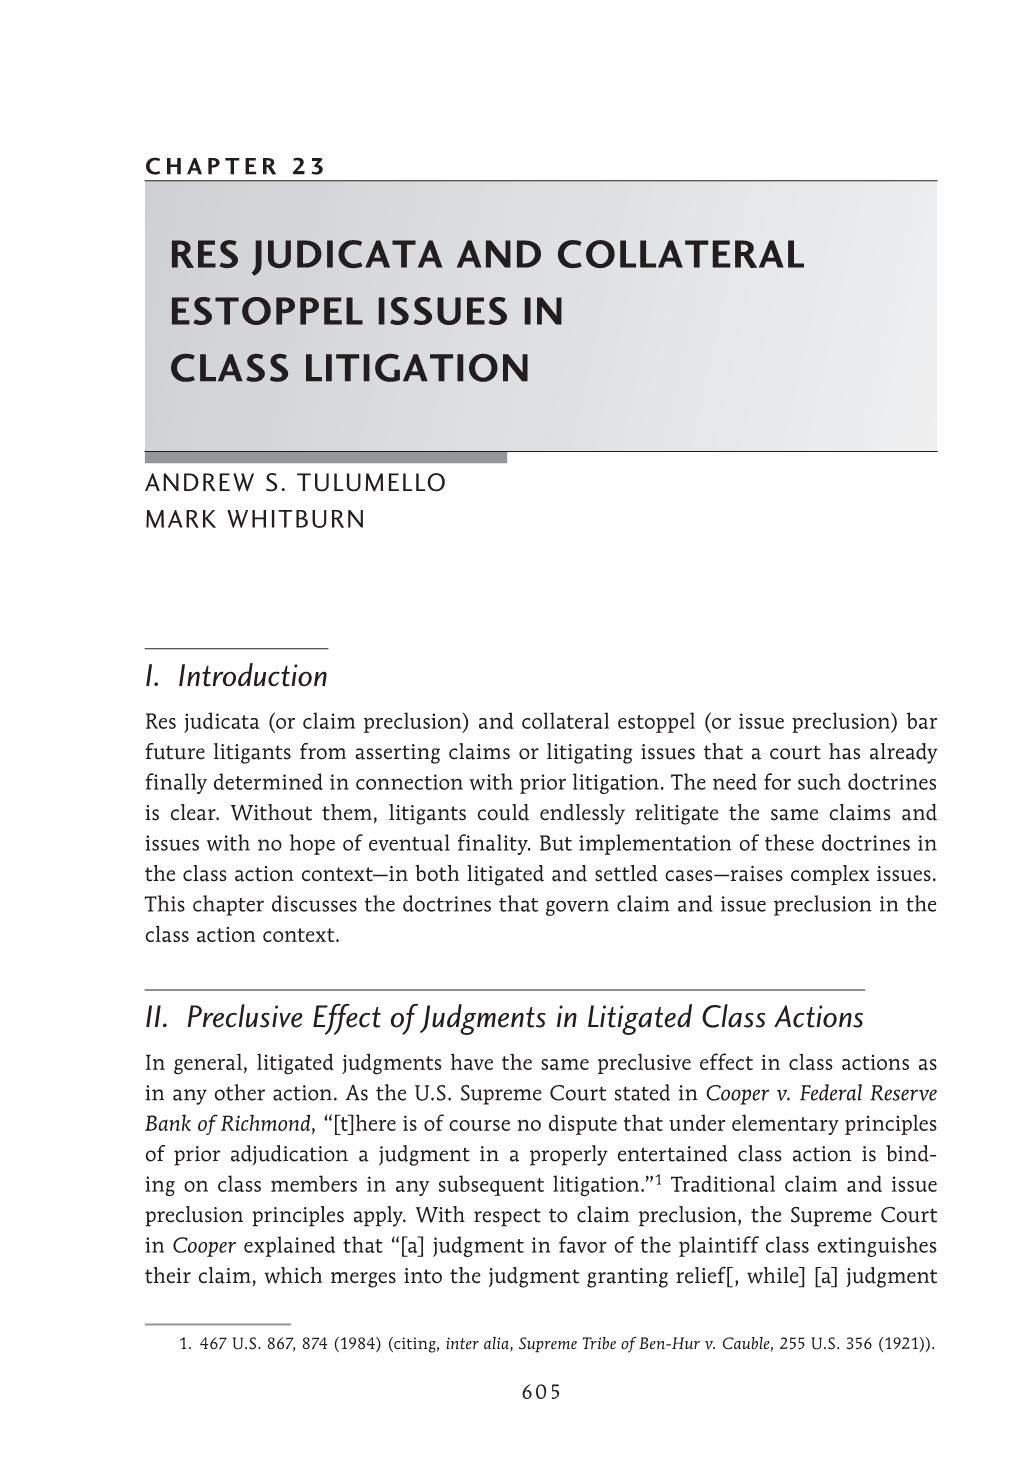 Res Judicata and Collateral Estoppel Issues in Class Litigation